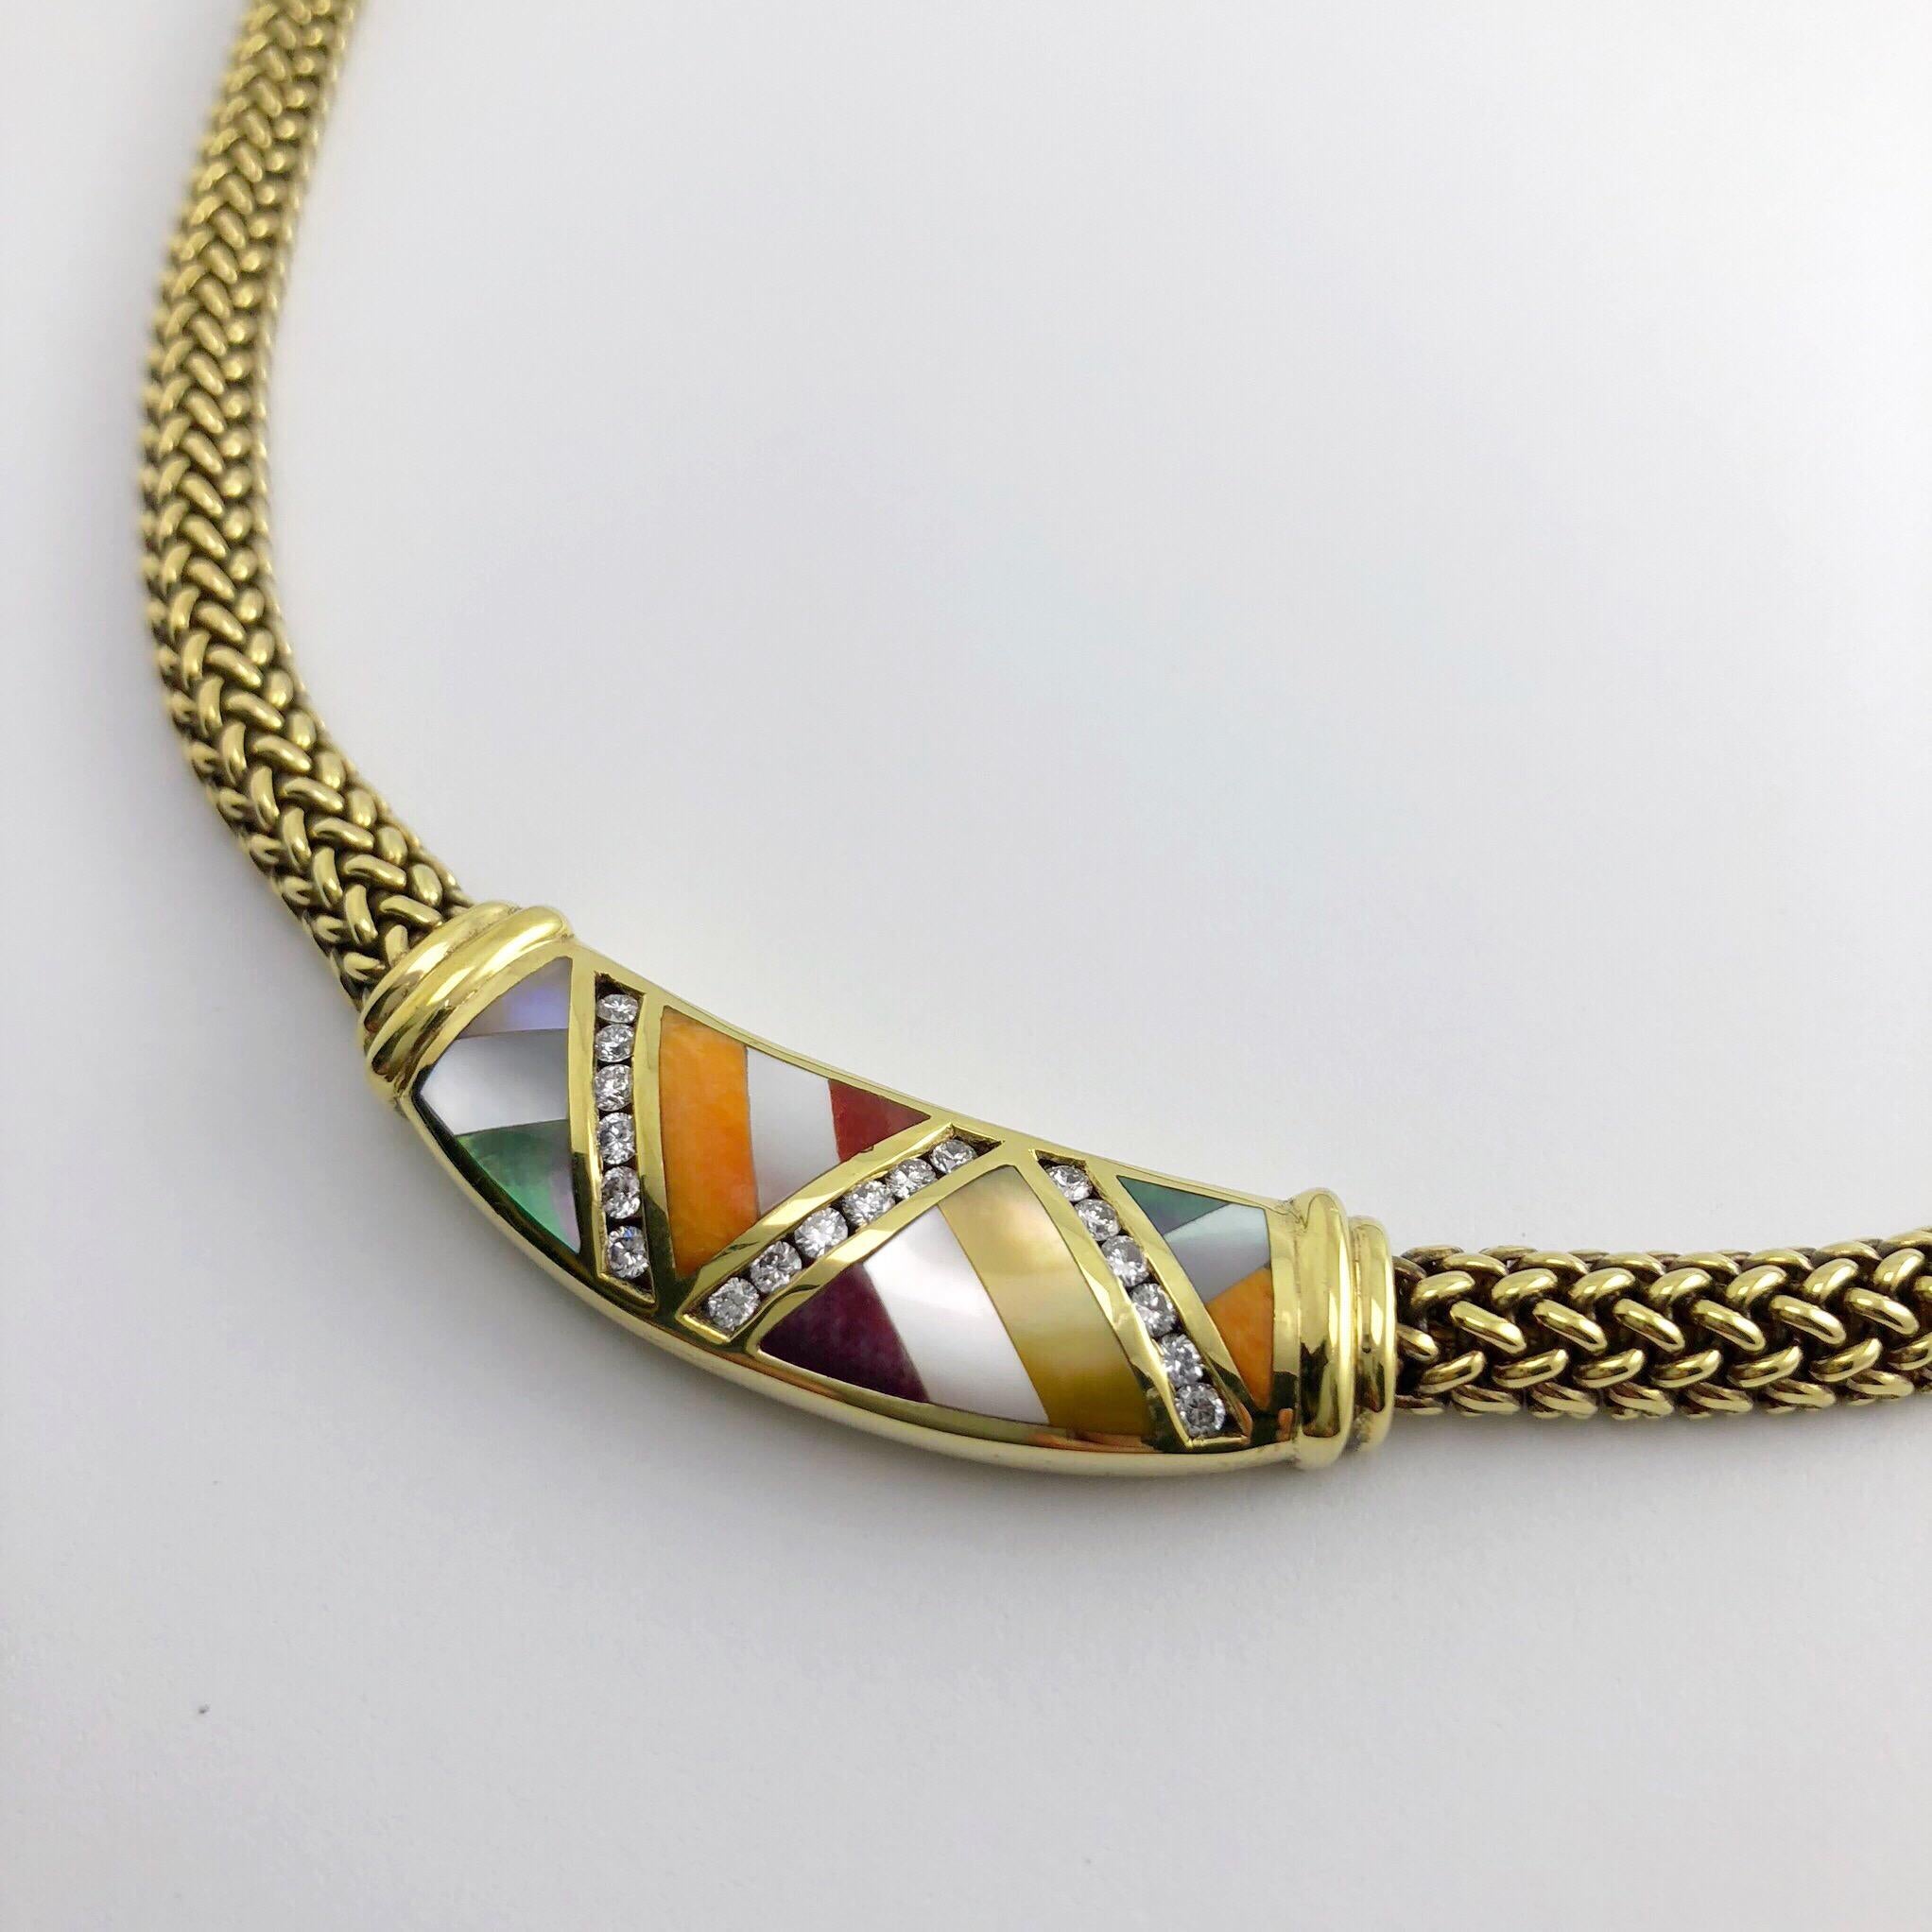 This Fun, colorful, and wearable Asch Grossbardt piece features a 17 inch, 18 karat yellow gold mesh chain which has a center section set with 18 round brilliant diamonds weighing .45 carats. The centerpiece is inlaid with geometric shapes of spiny